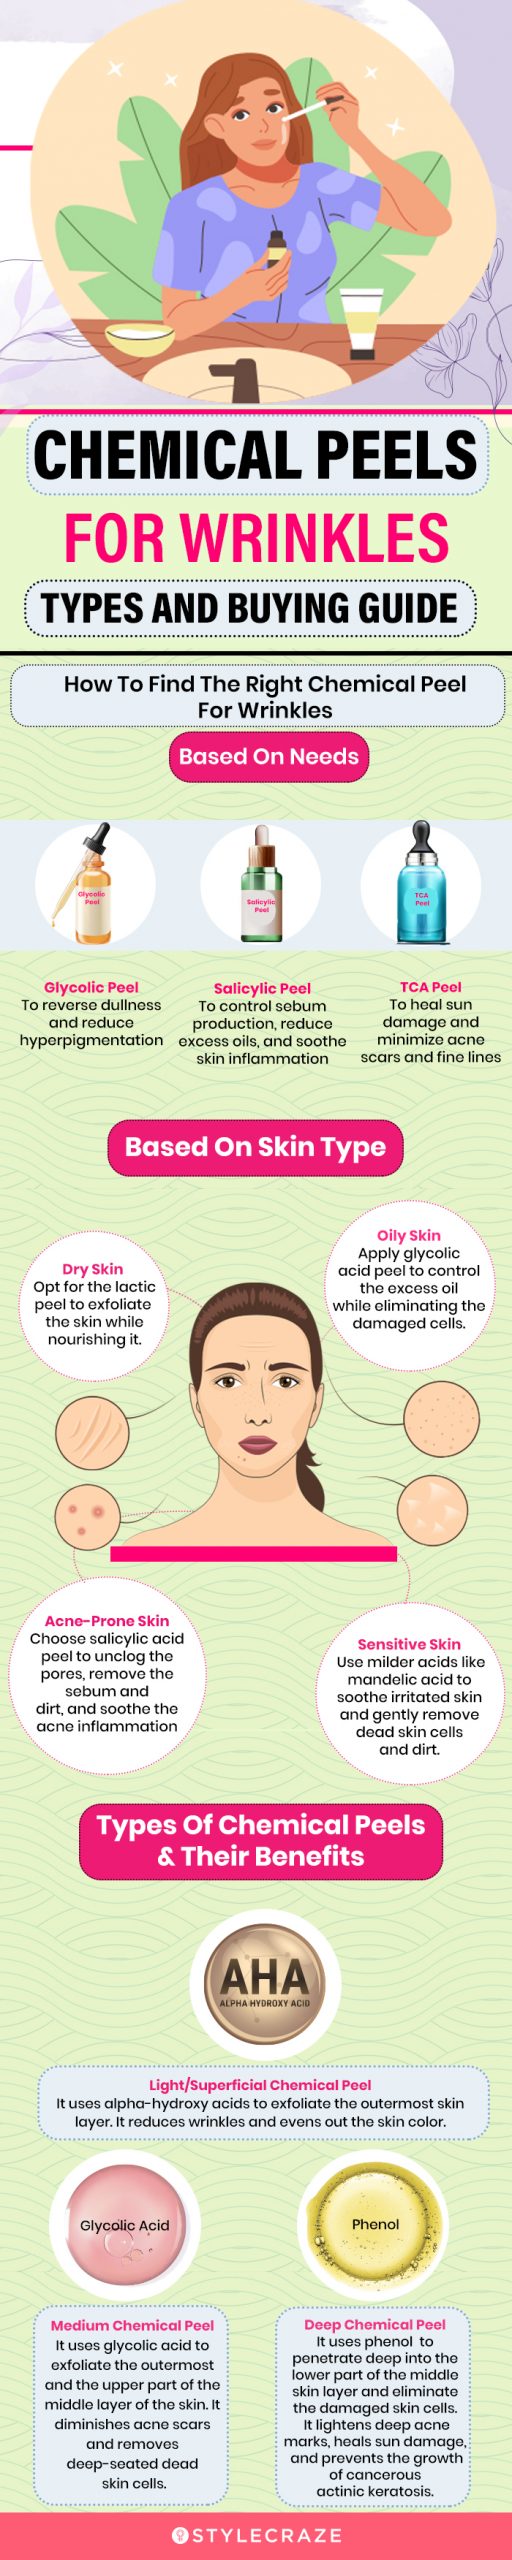 Chemical Peels For Wrinkles: Types And Buying Guide [infographic]